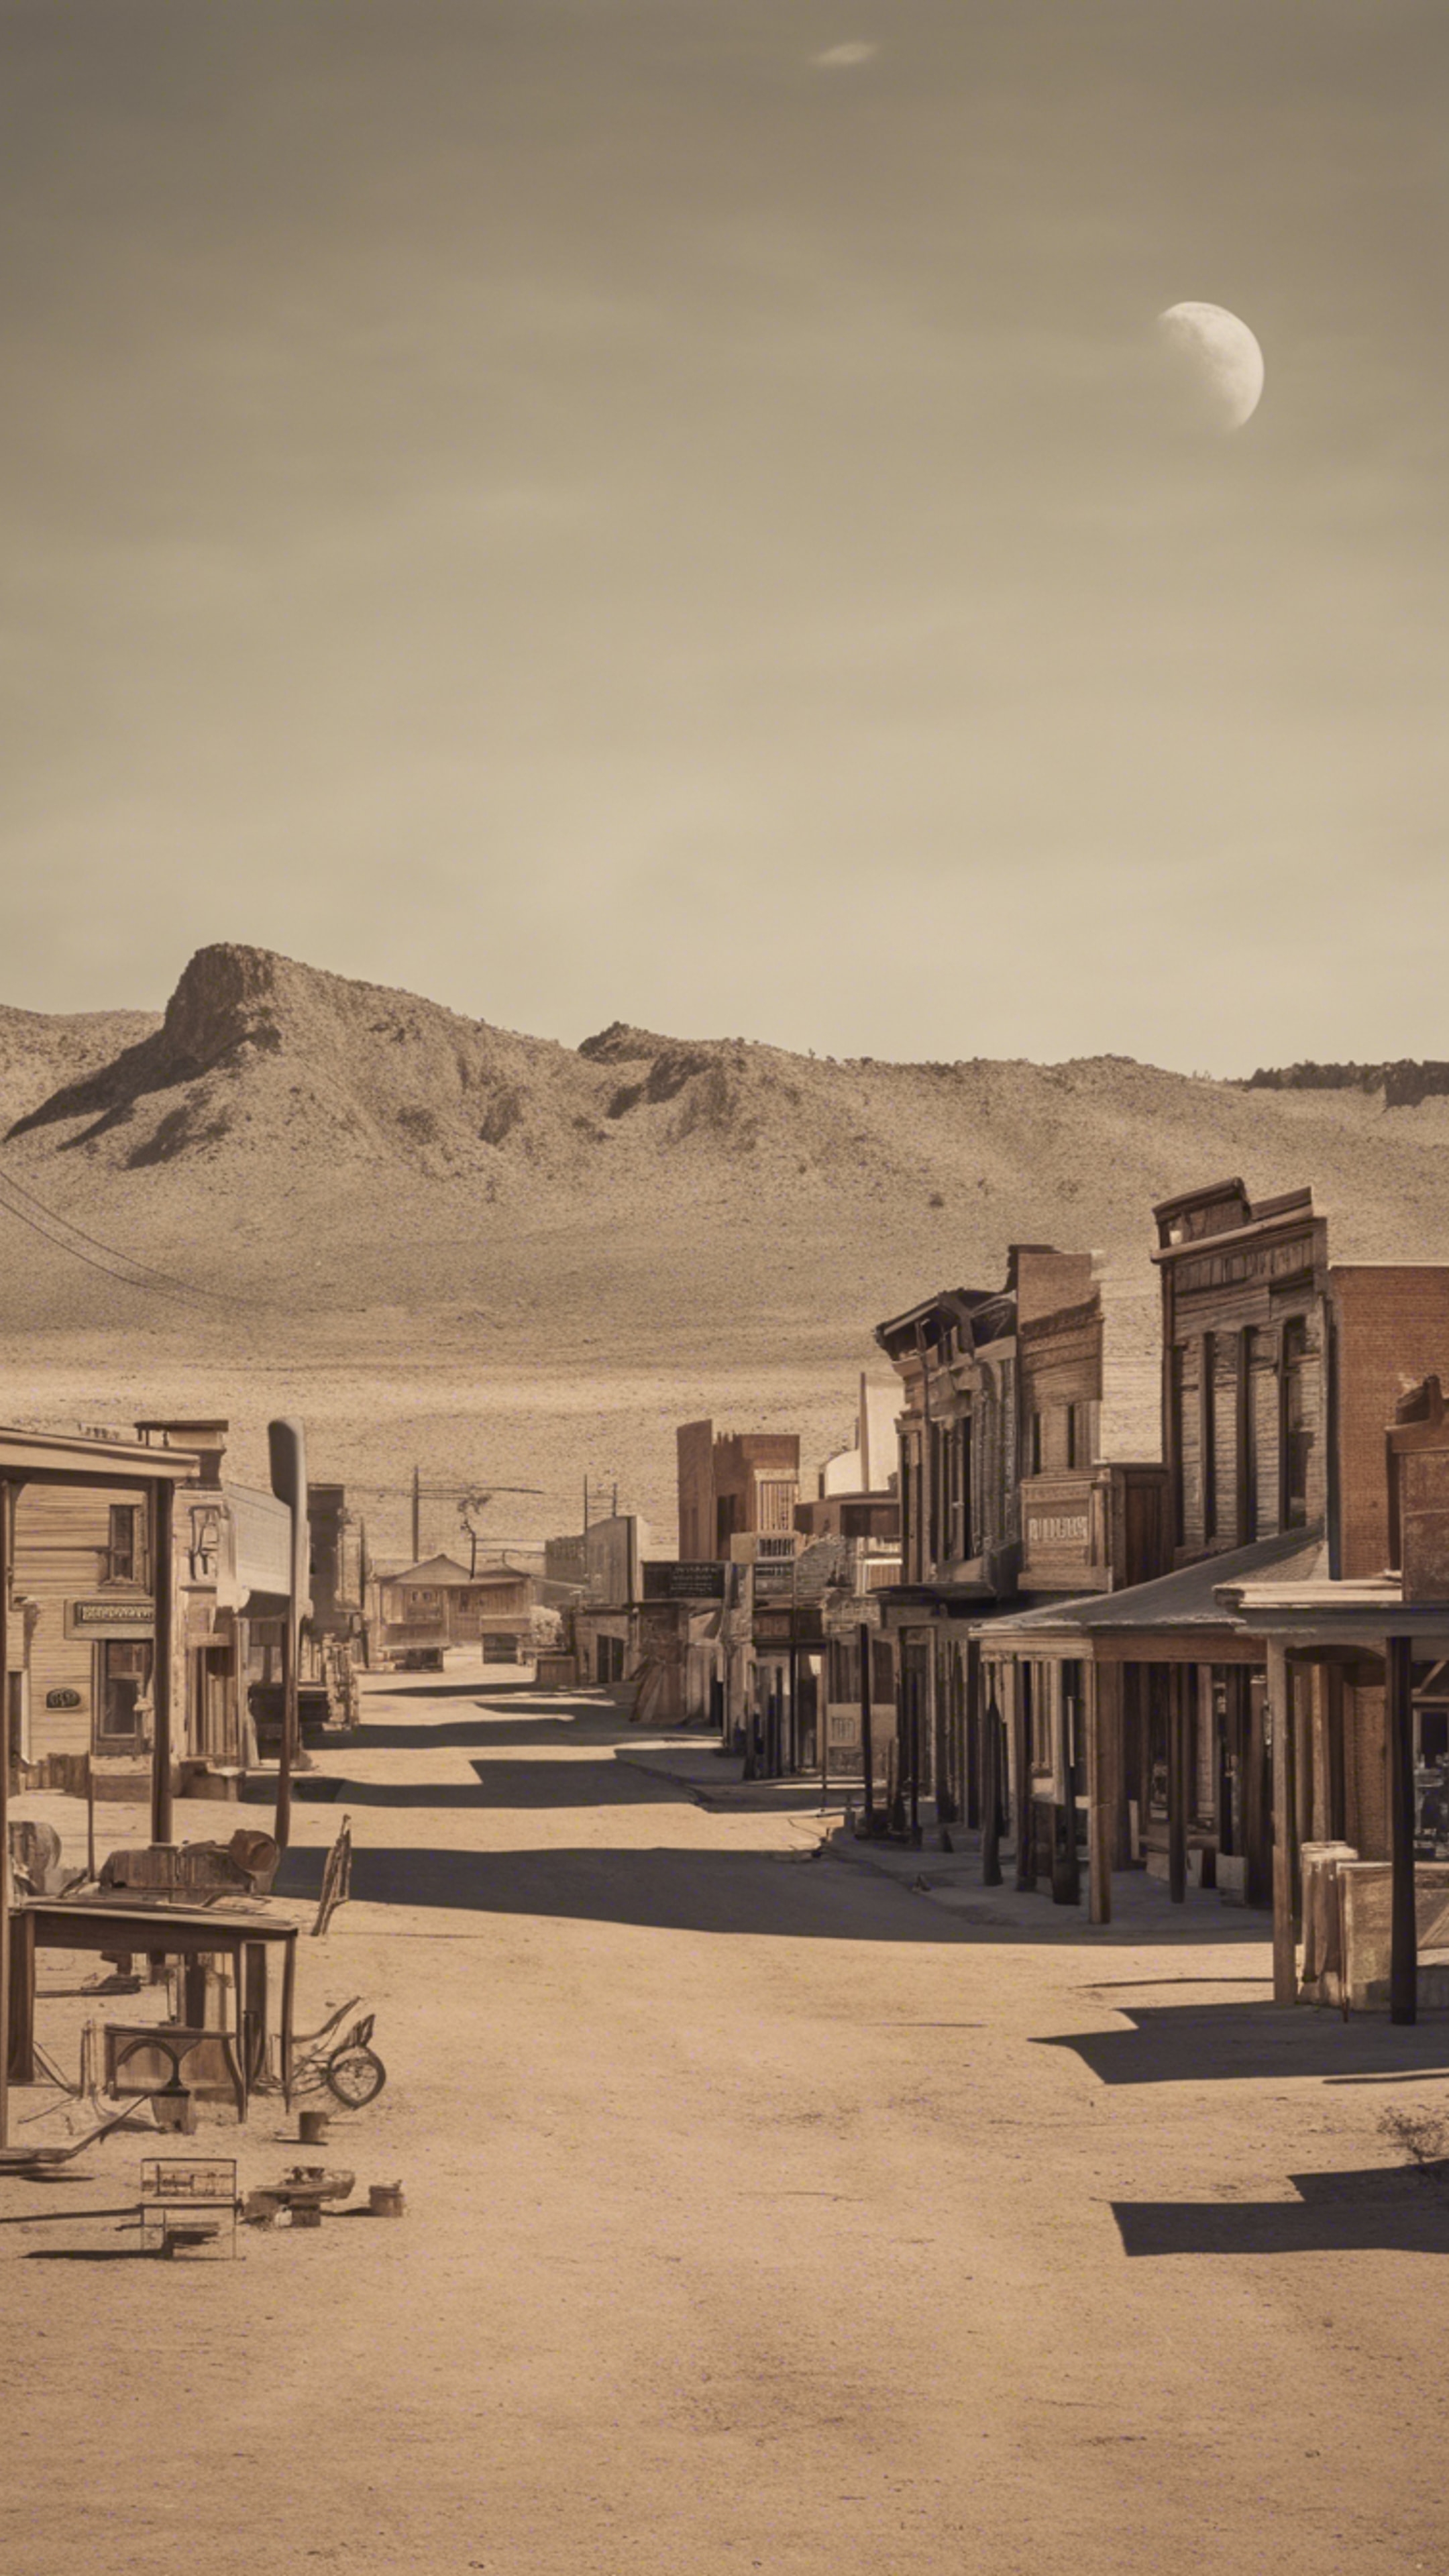 A nostalgic portrayal of a deserted old western town skyline at high noon. Wallpaper[6f3773f399464a7985e4]